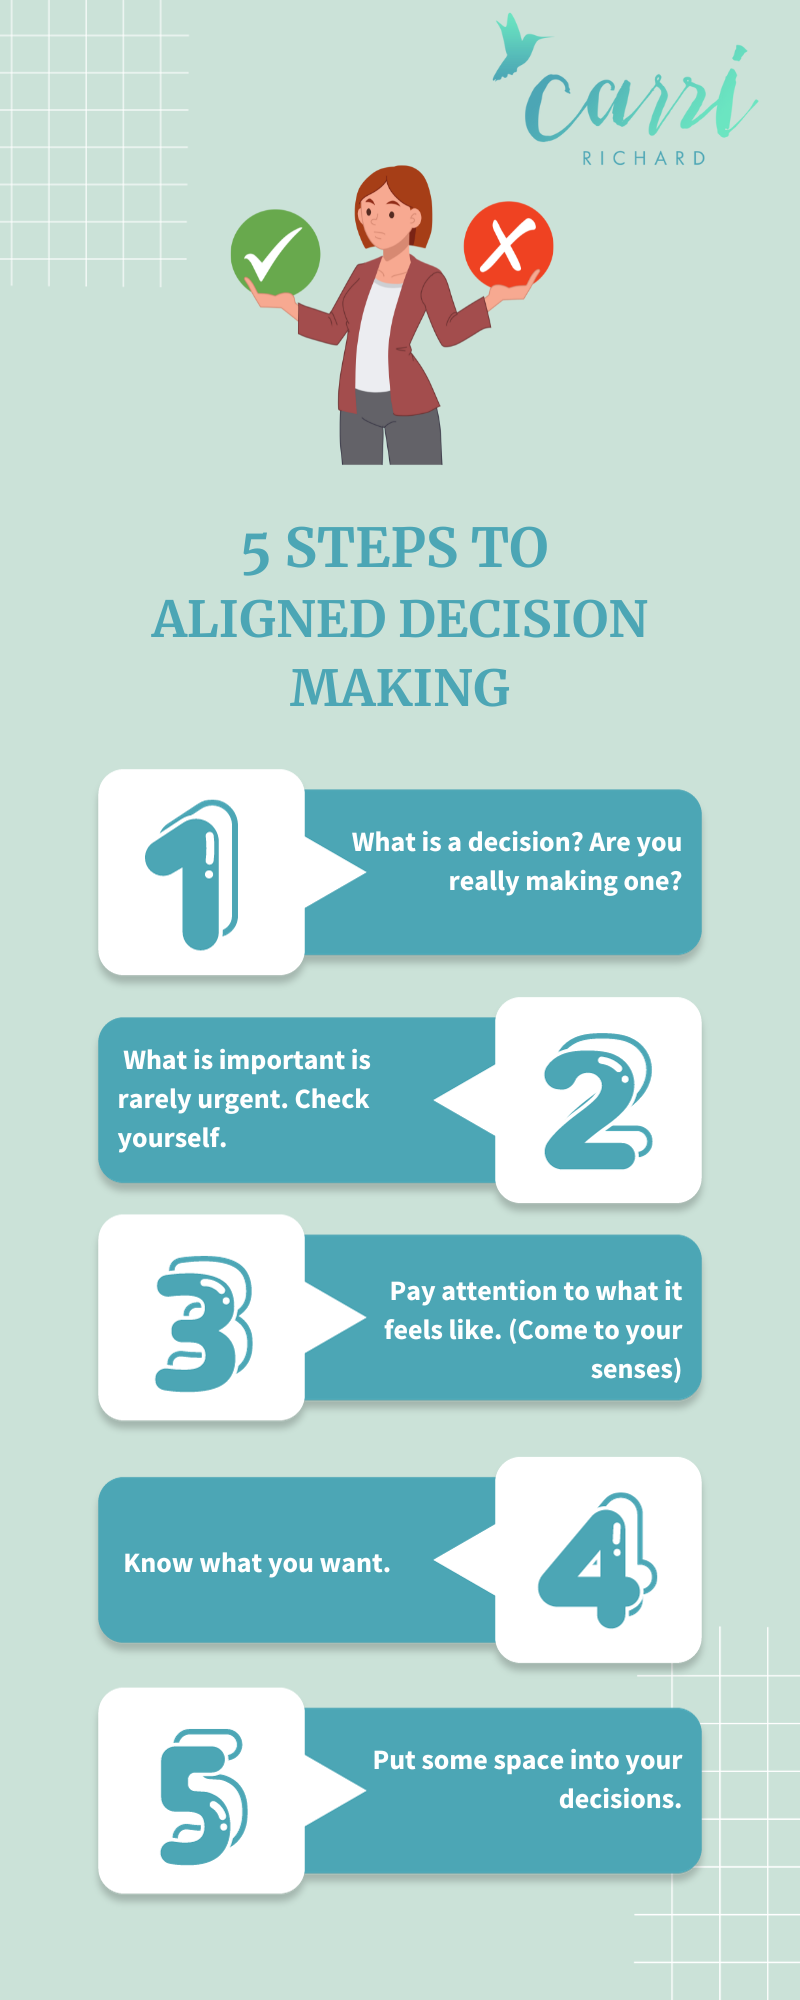 Infographic outlining the 5 steps to aligned decision making for a fulfilling life.